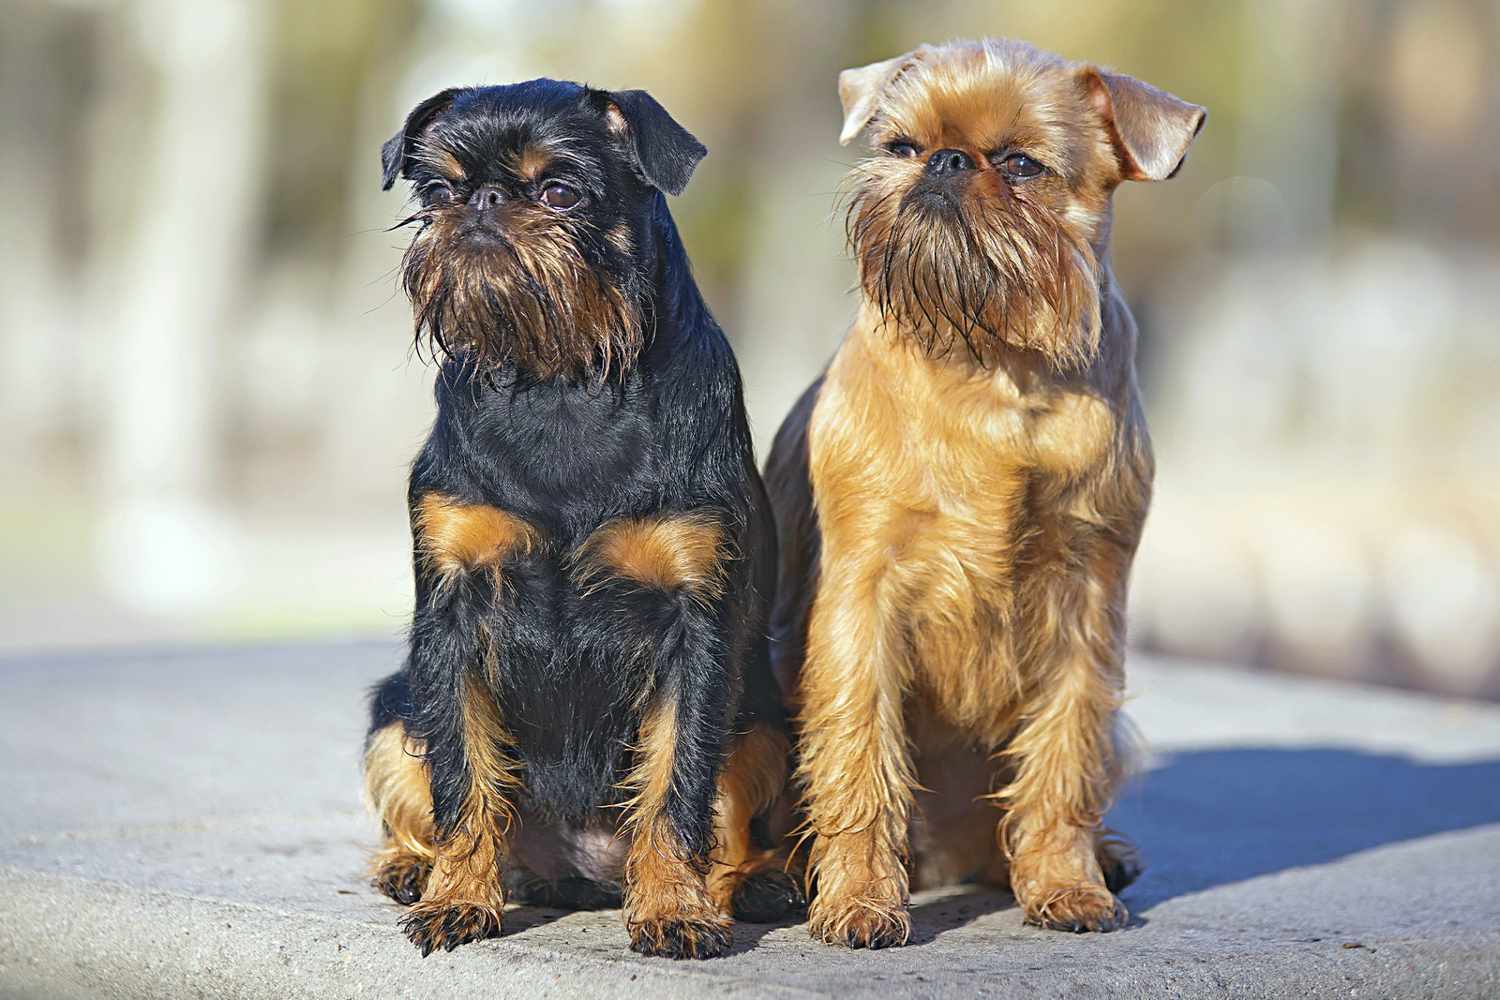 two brussels griffon dogs sitting together on a concrete slab